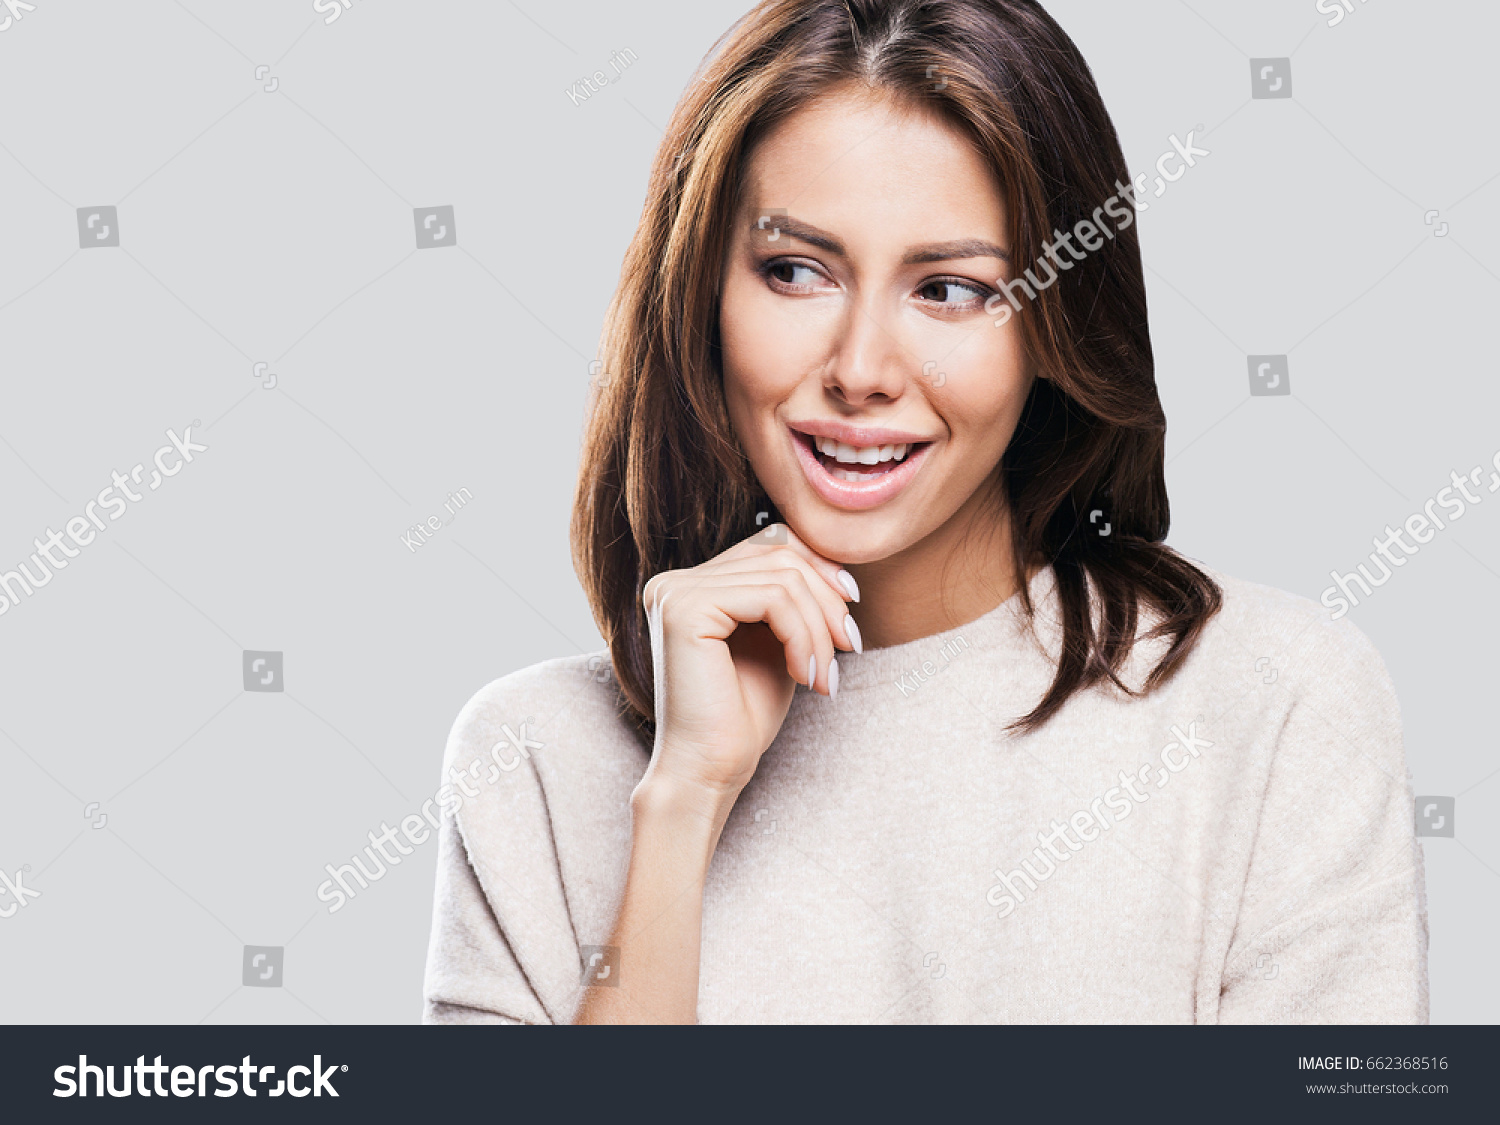 Studio portrait of a beautiful young woman with brown hair. Pretty model girl looking away #662368516